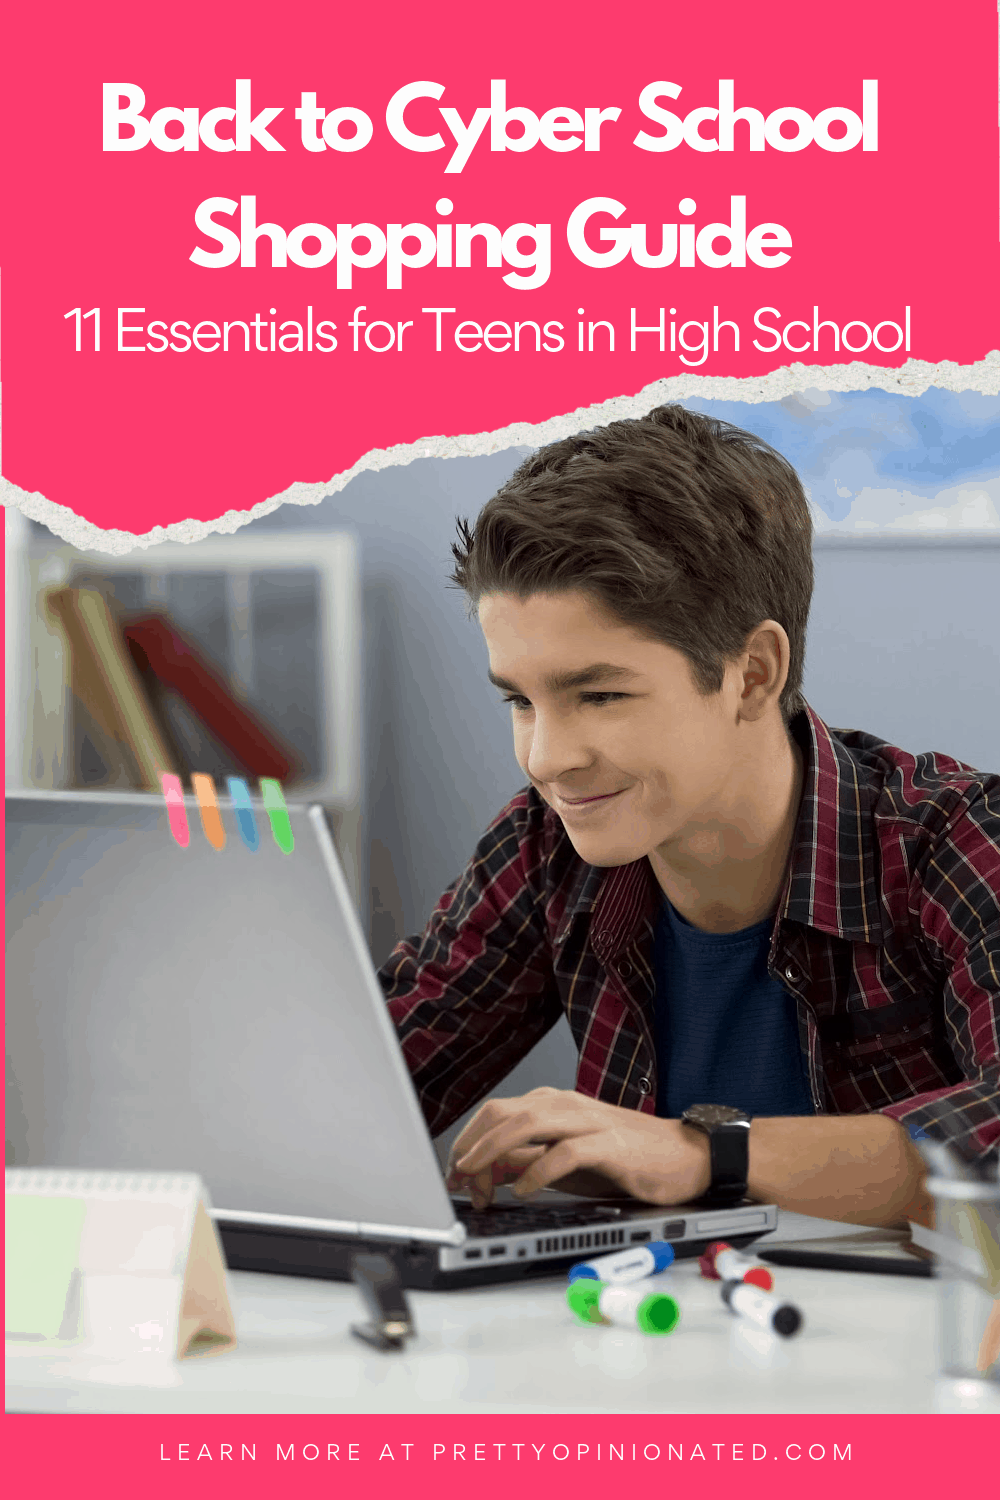 Sending your teens to cyber school this year? Check out these 11 things that should be on your supply list! Some are essentials, others are nice-to-haves. All will help make their transition easier.